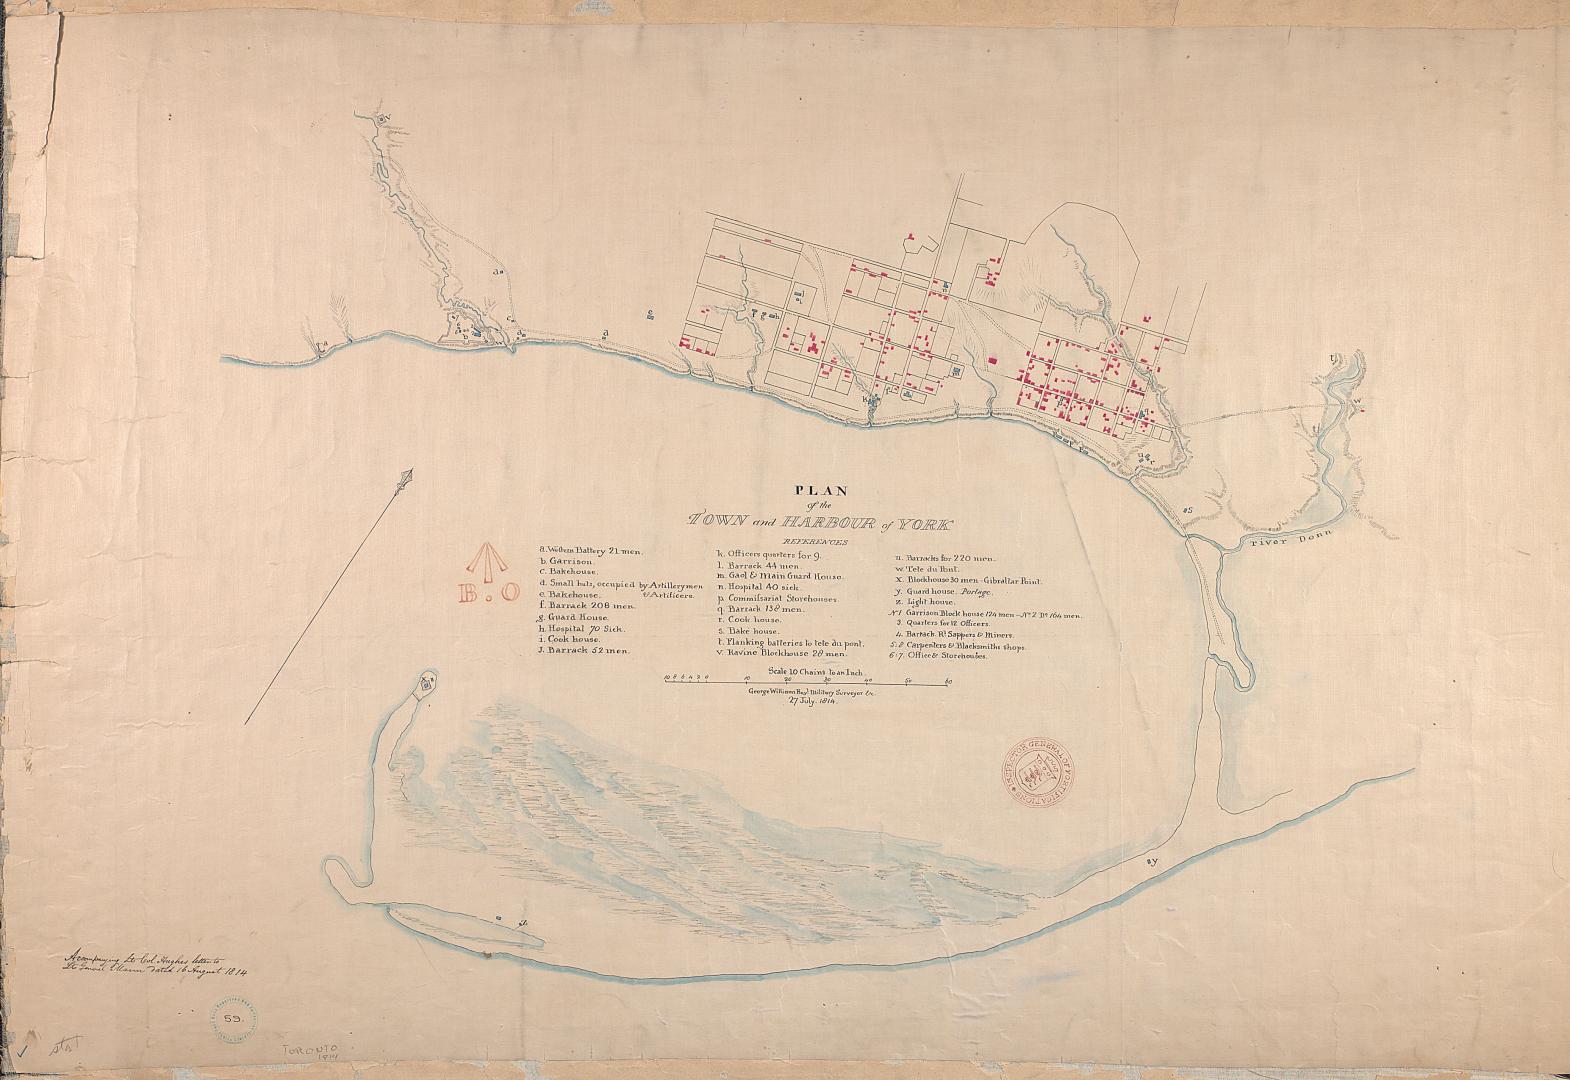 (1814) Plan of the town and harbour of York